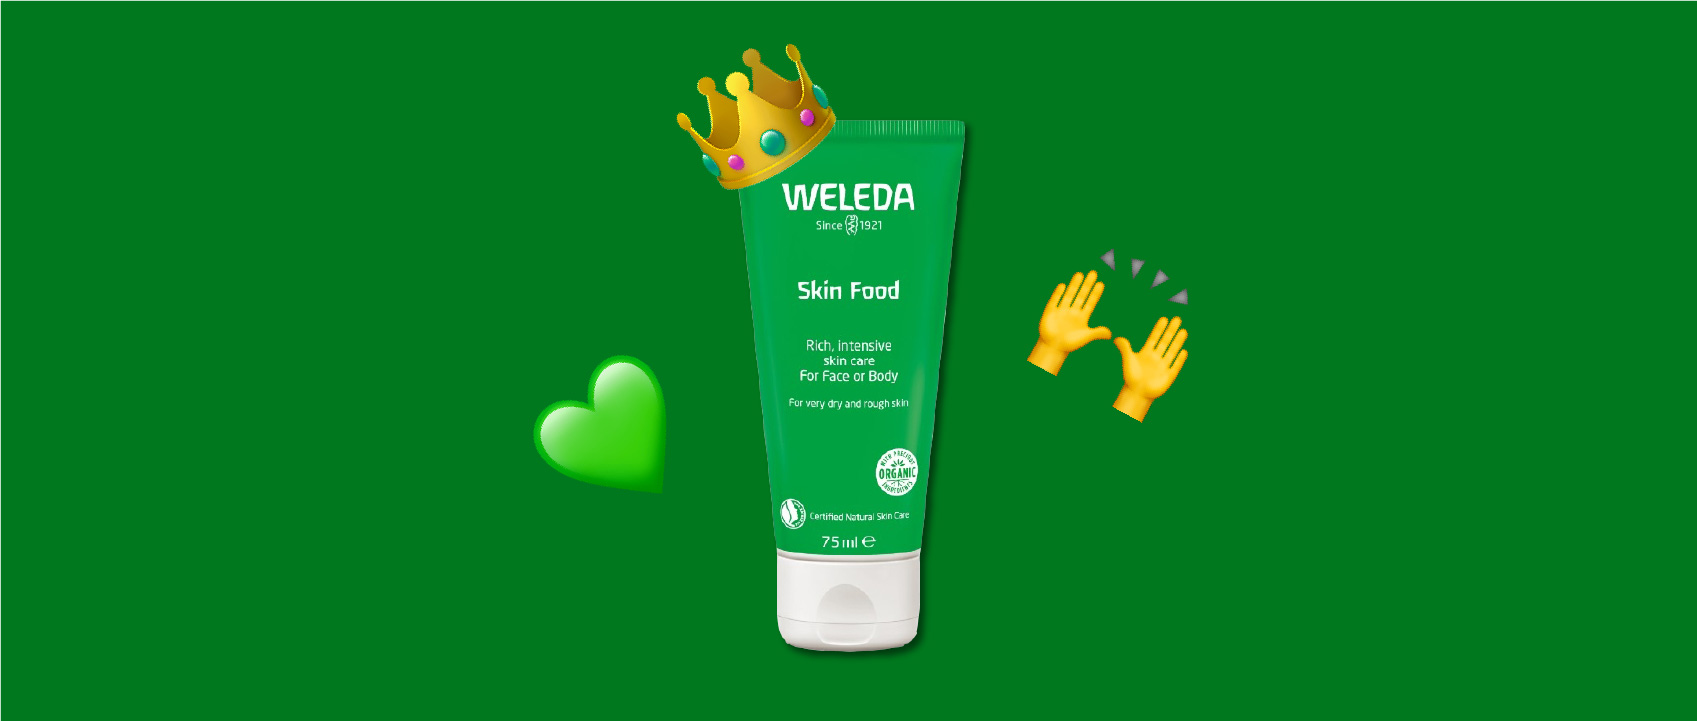 bottle of skin food by weleda with emojis of a crown, a green heart and raising hands